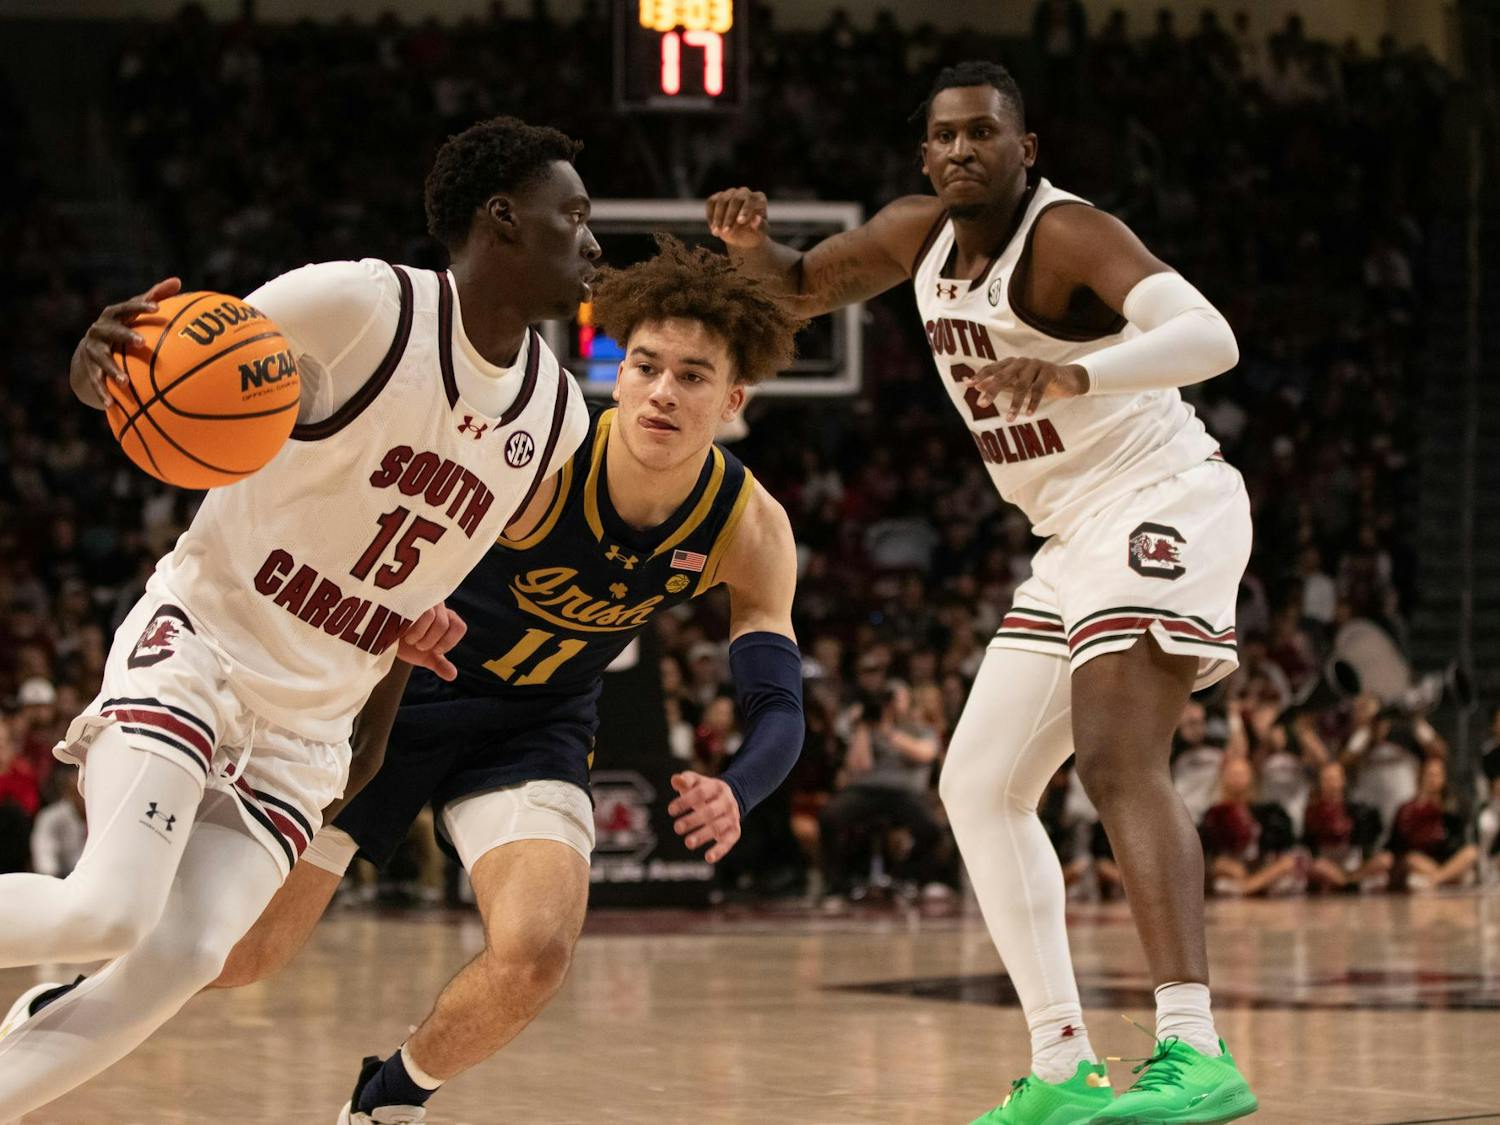 Freshman guard Morris Ugusuk drives the baseline before making a pass to graduate forward B.J. Mack during their game against Notre Dame on Nov. 28, 2023. Ugusuk played 12 minutes in the Gamecocks' 65-53 win but did not score any points.